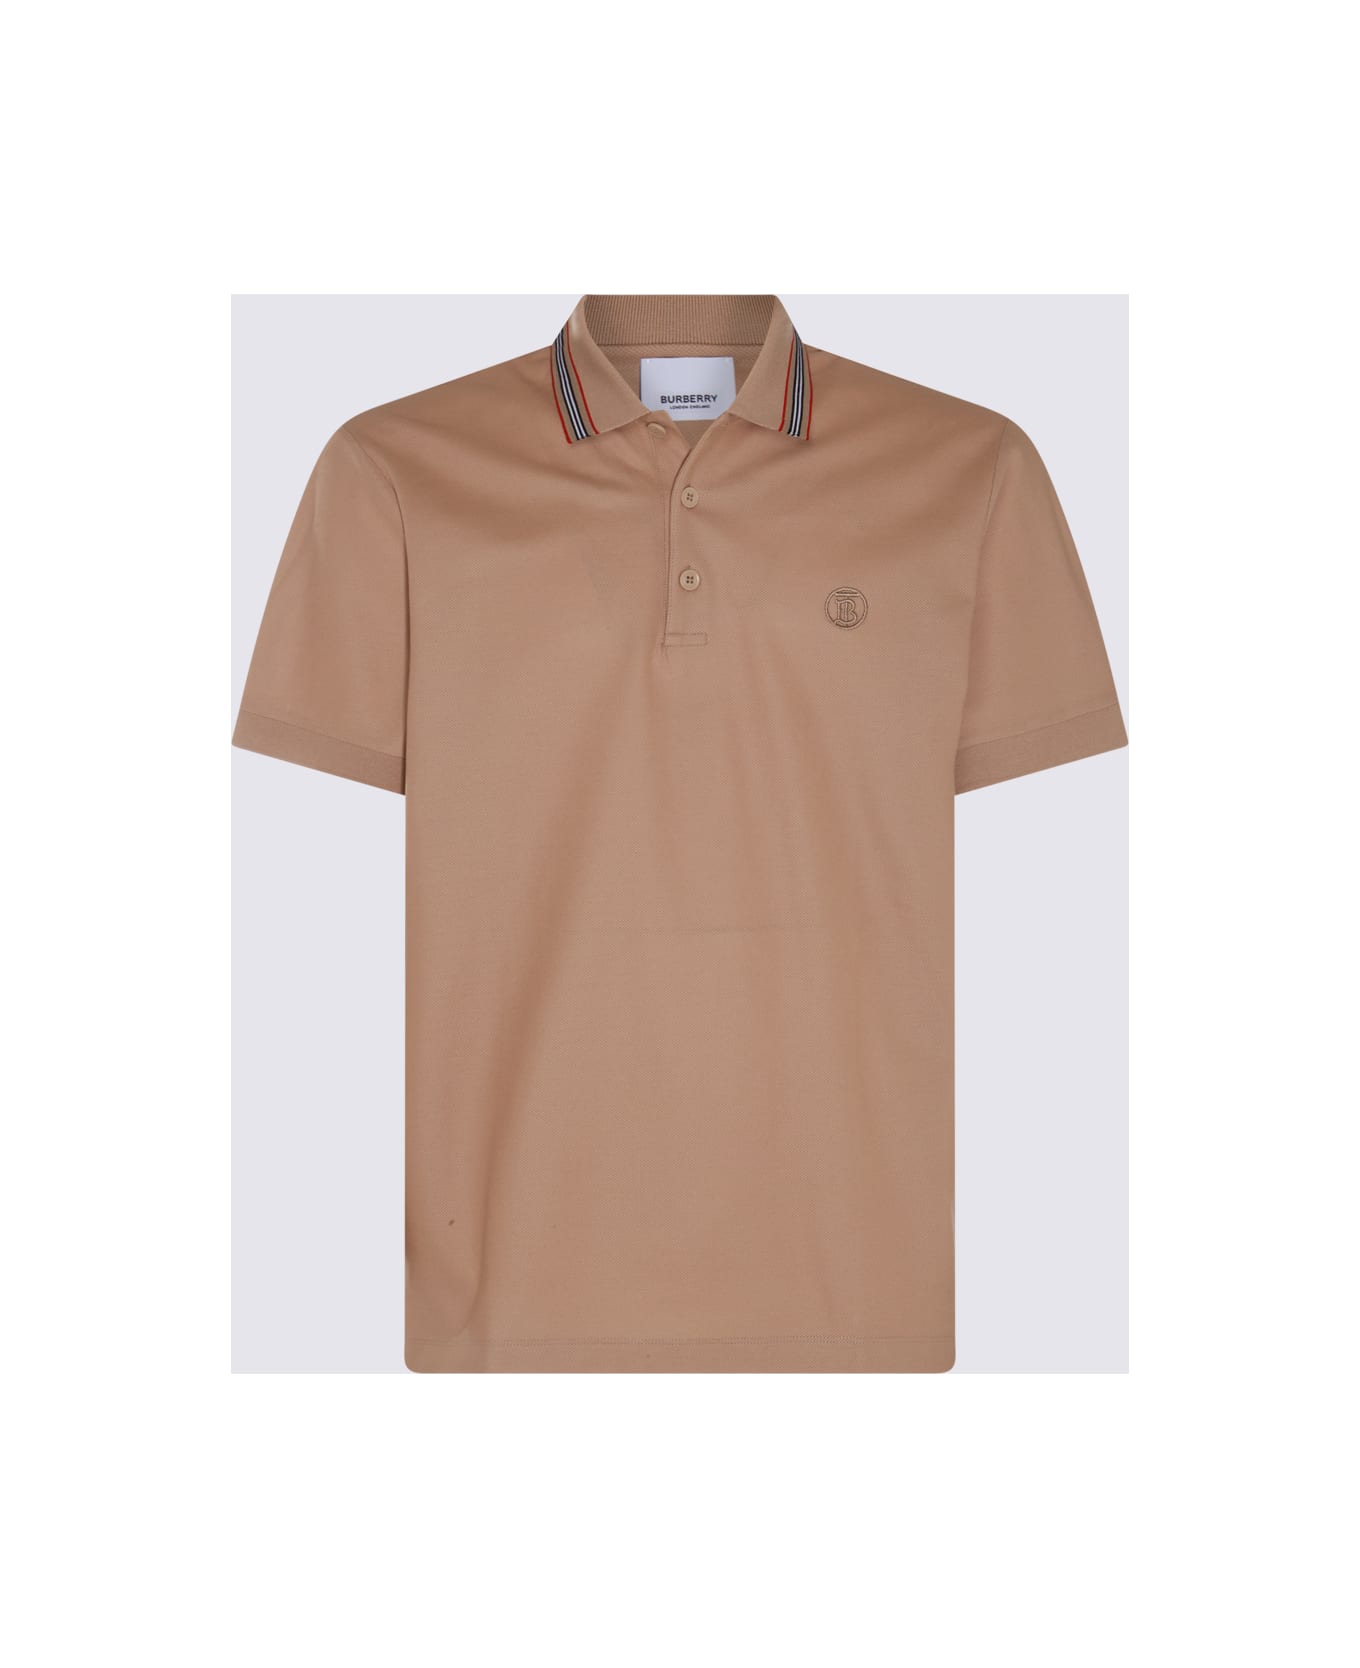 Burberry Beige Cotton Polo Shirt - SOFT FAWN ポロシャツ